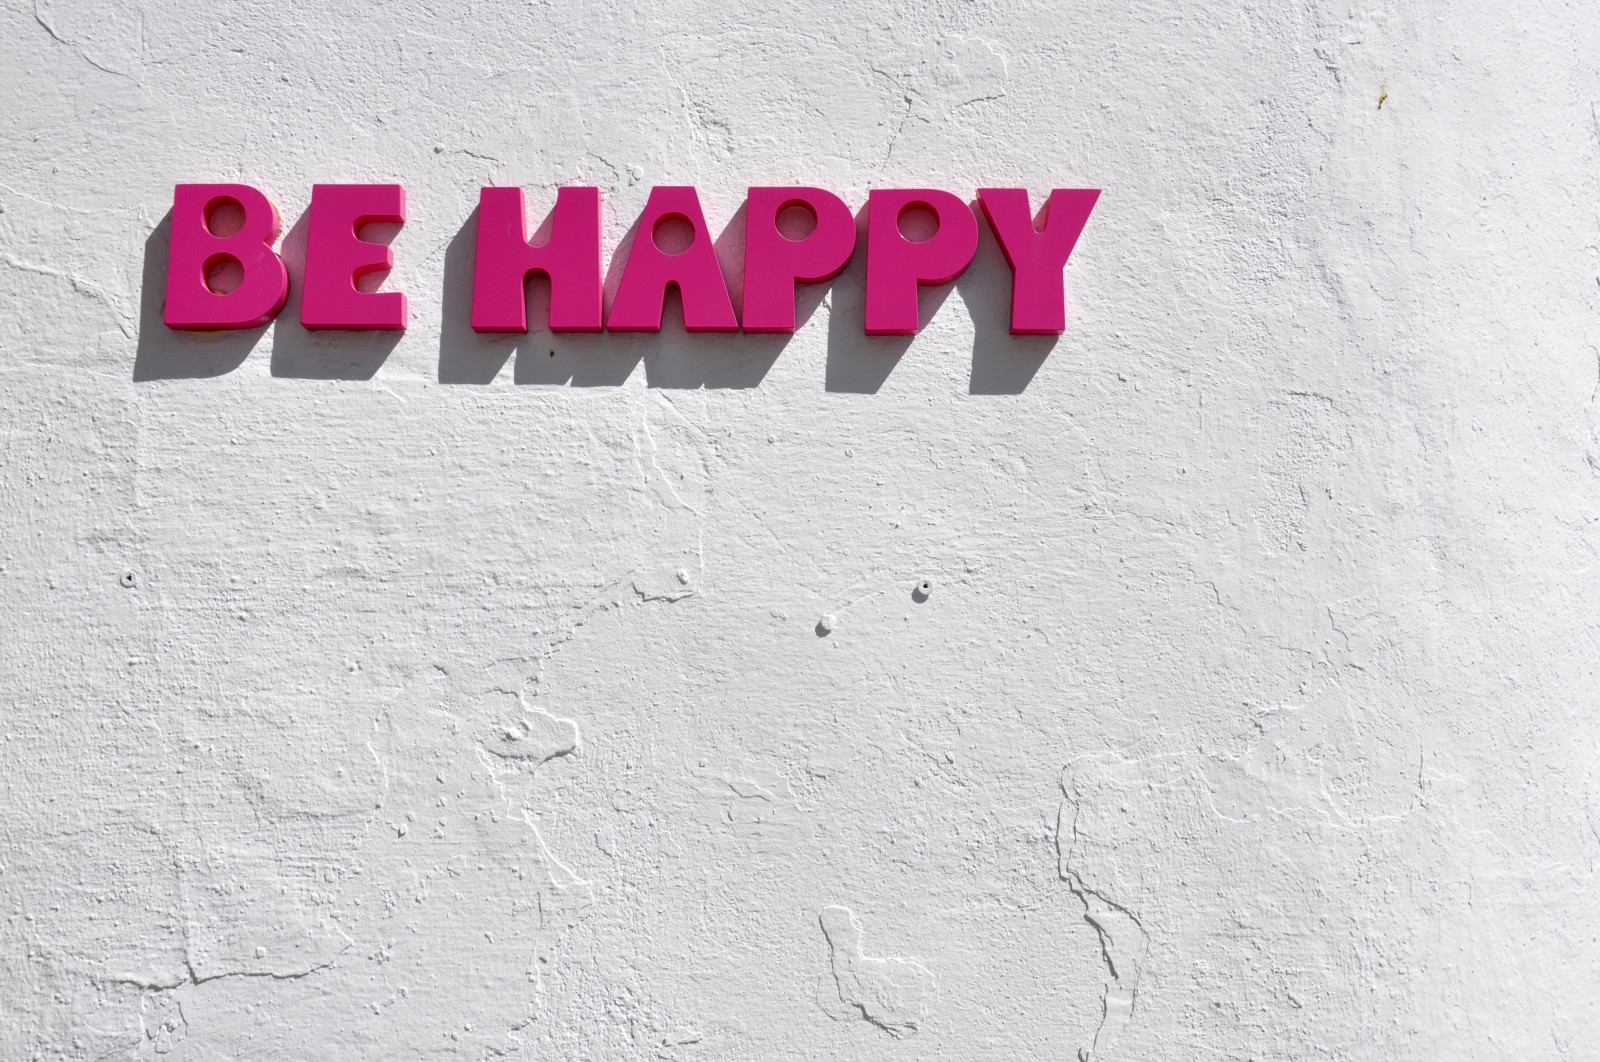 red be happy wall decor” by Alex Block on Unsplash